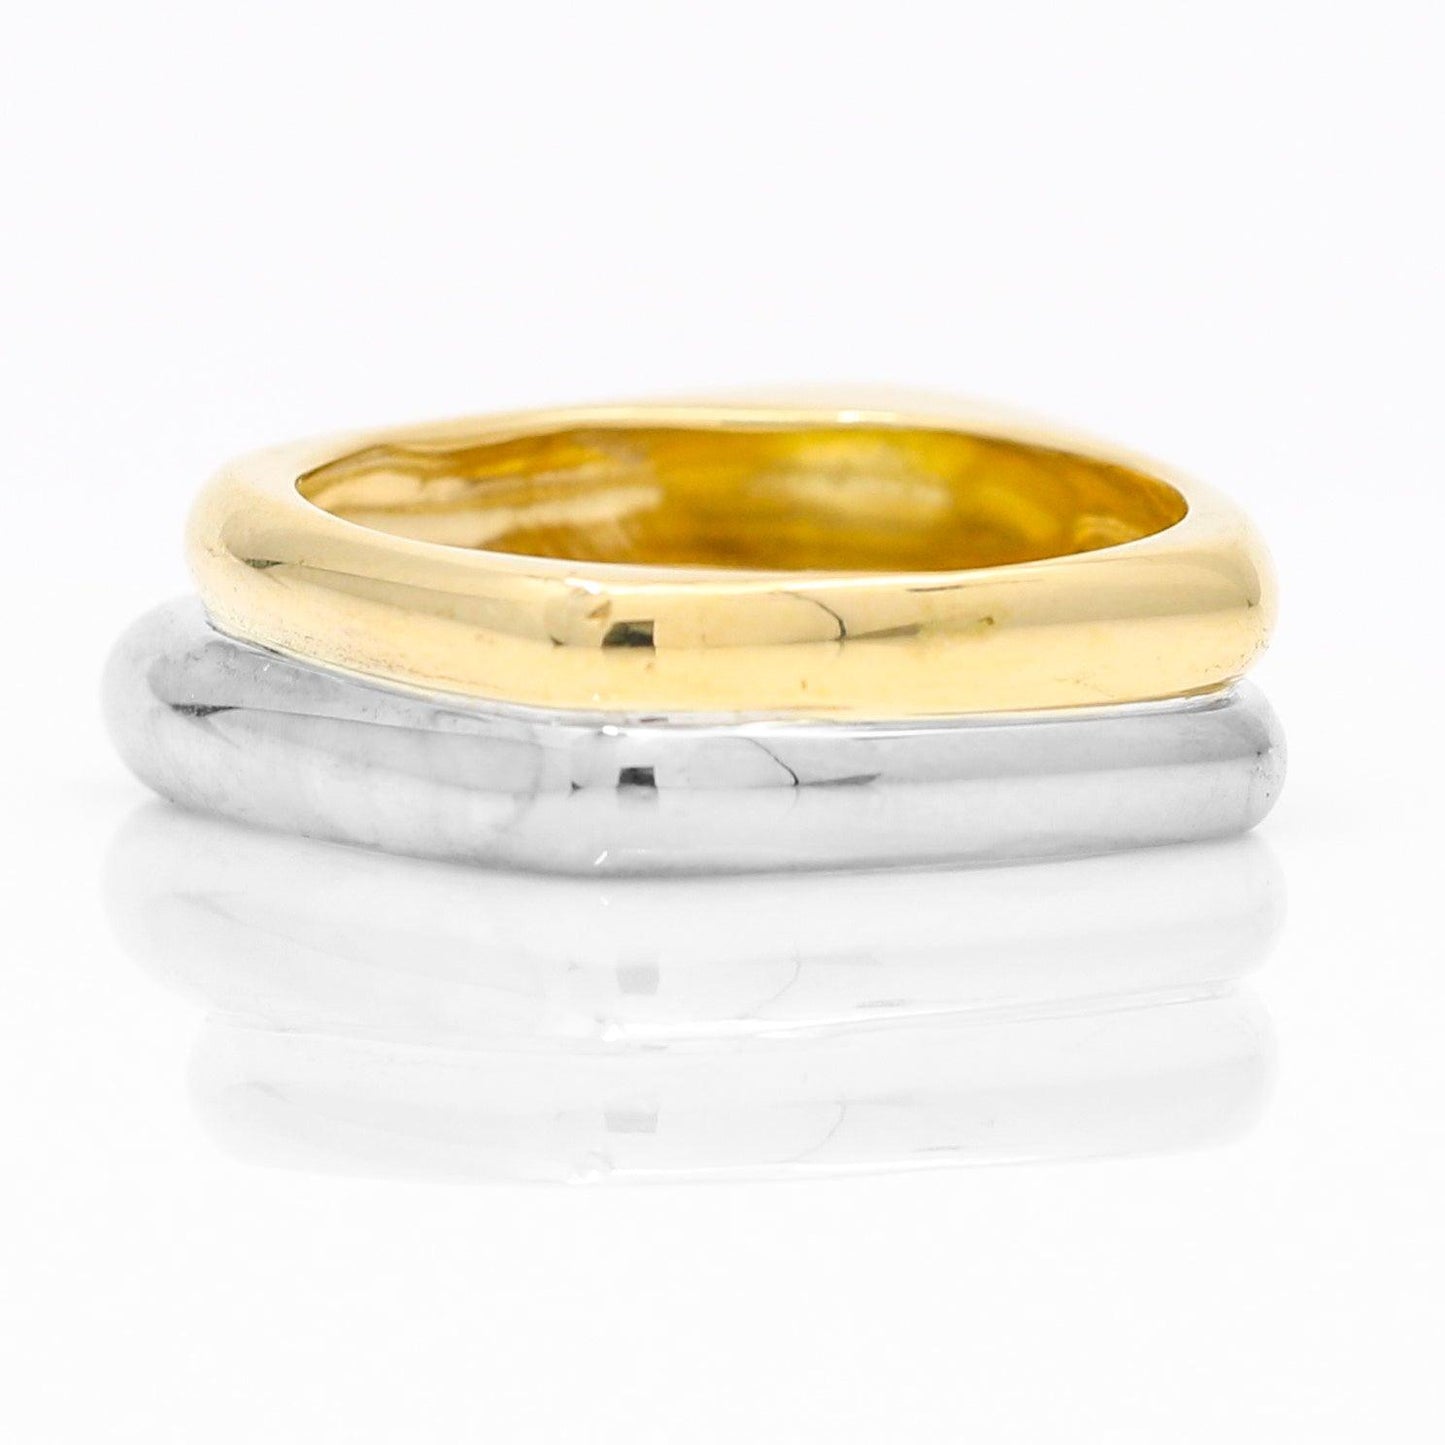 Women's Modern Band Ring in 18k White and Yellow Gold - 31 Jewels Inc.